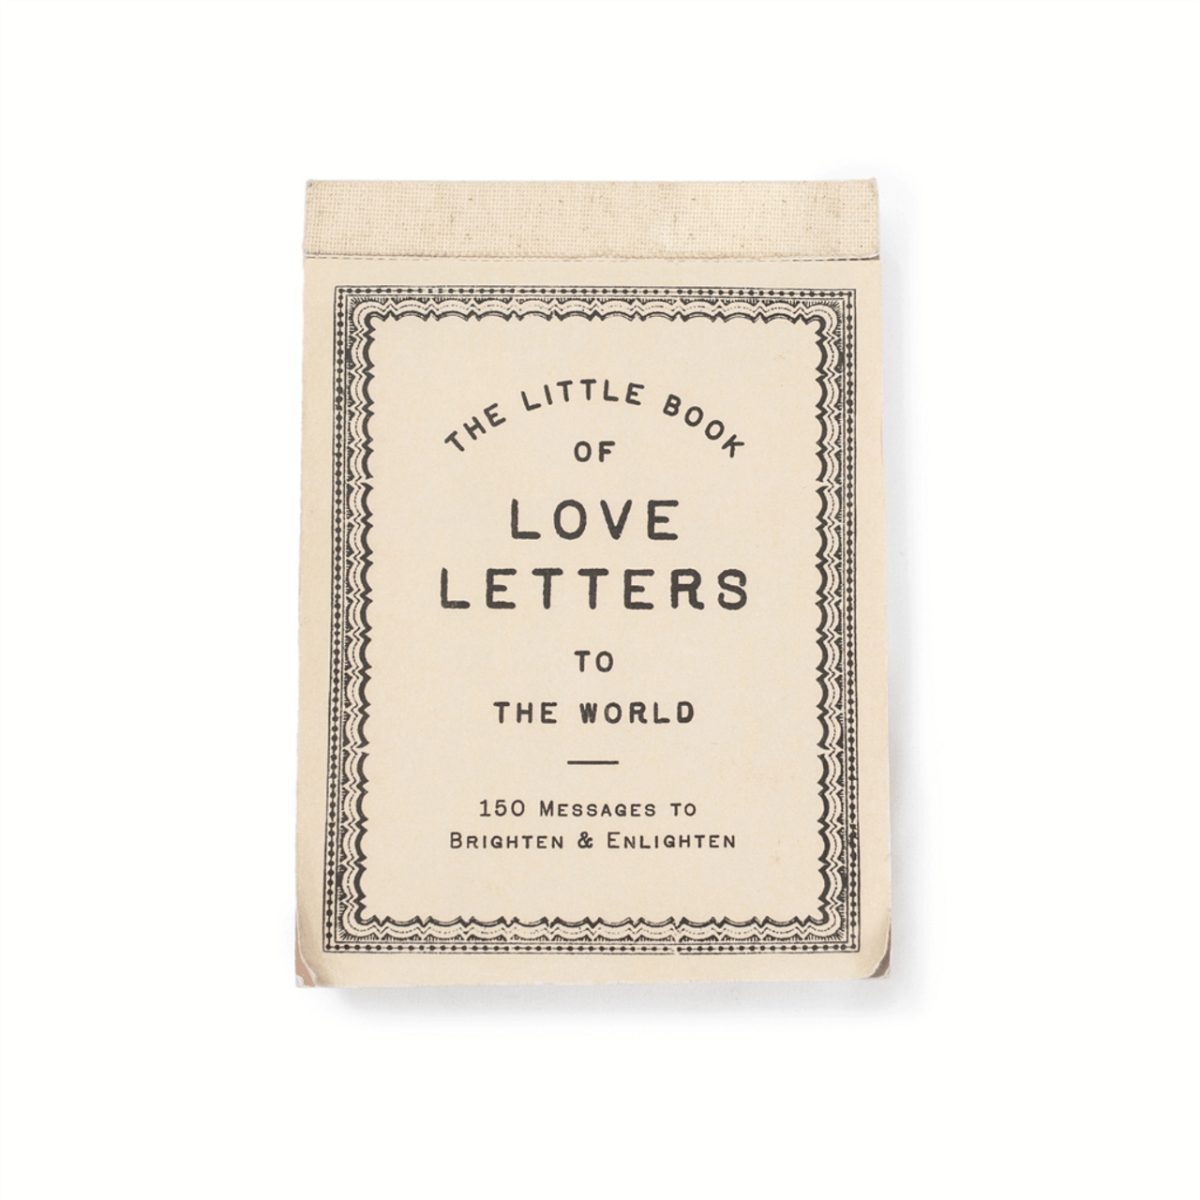 27. Express Your Love with a Personalized Book of Thoughtful Anniversary Letters